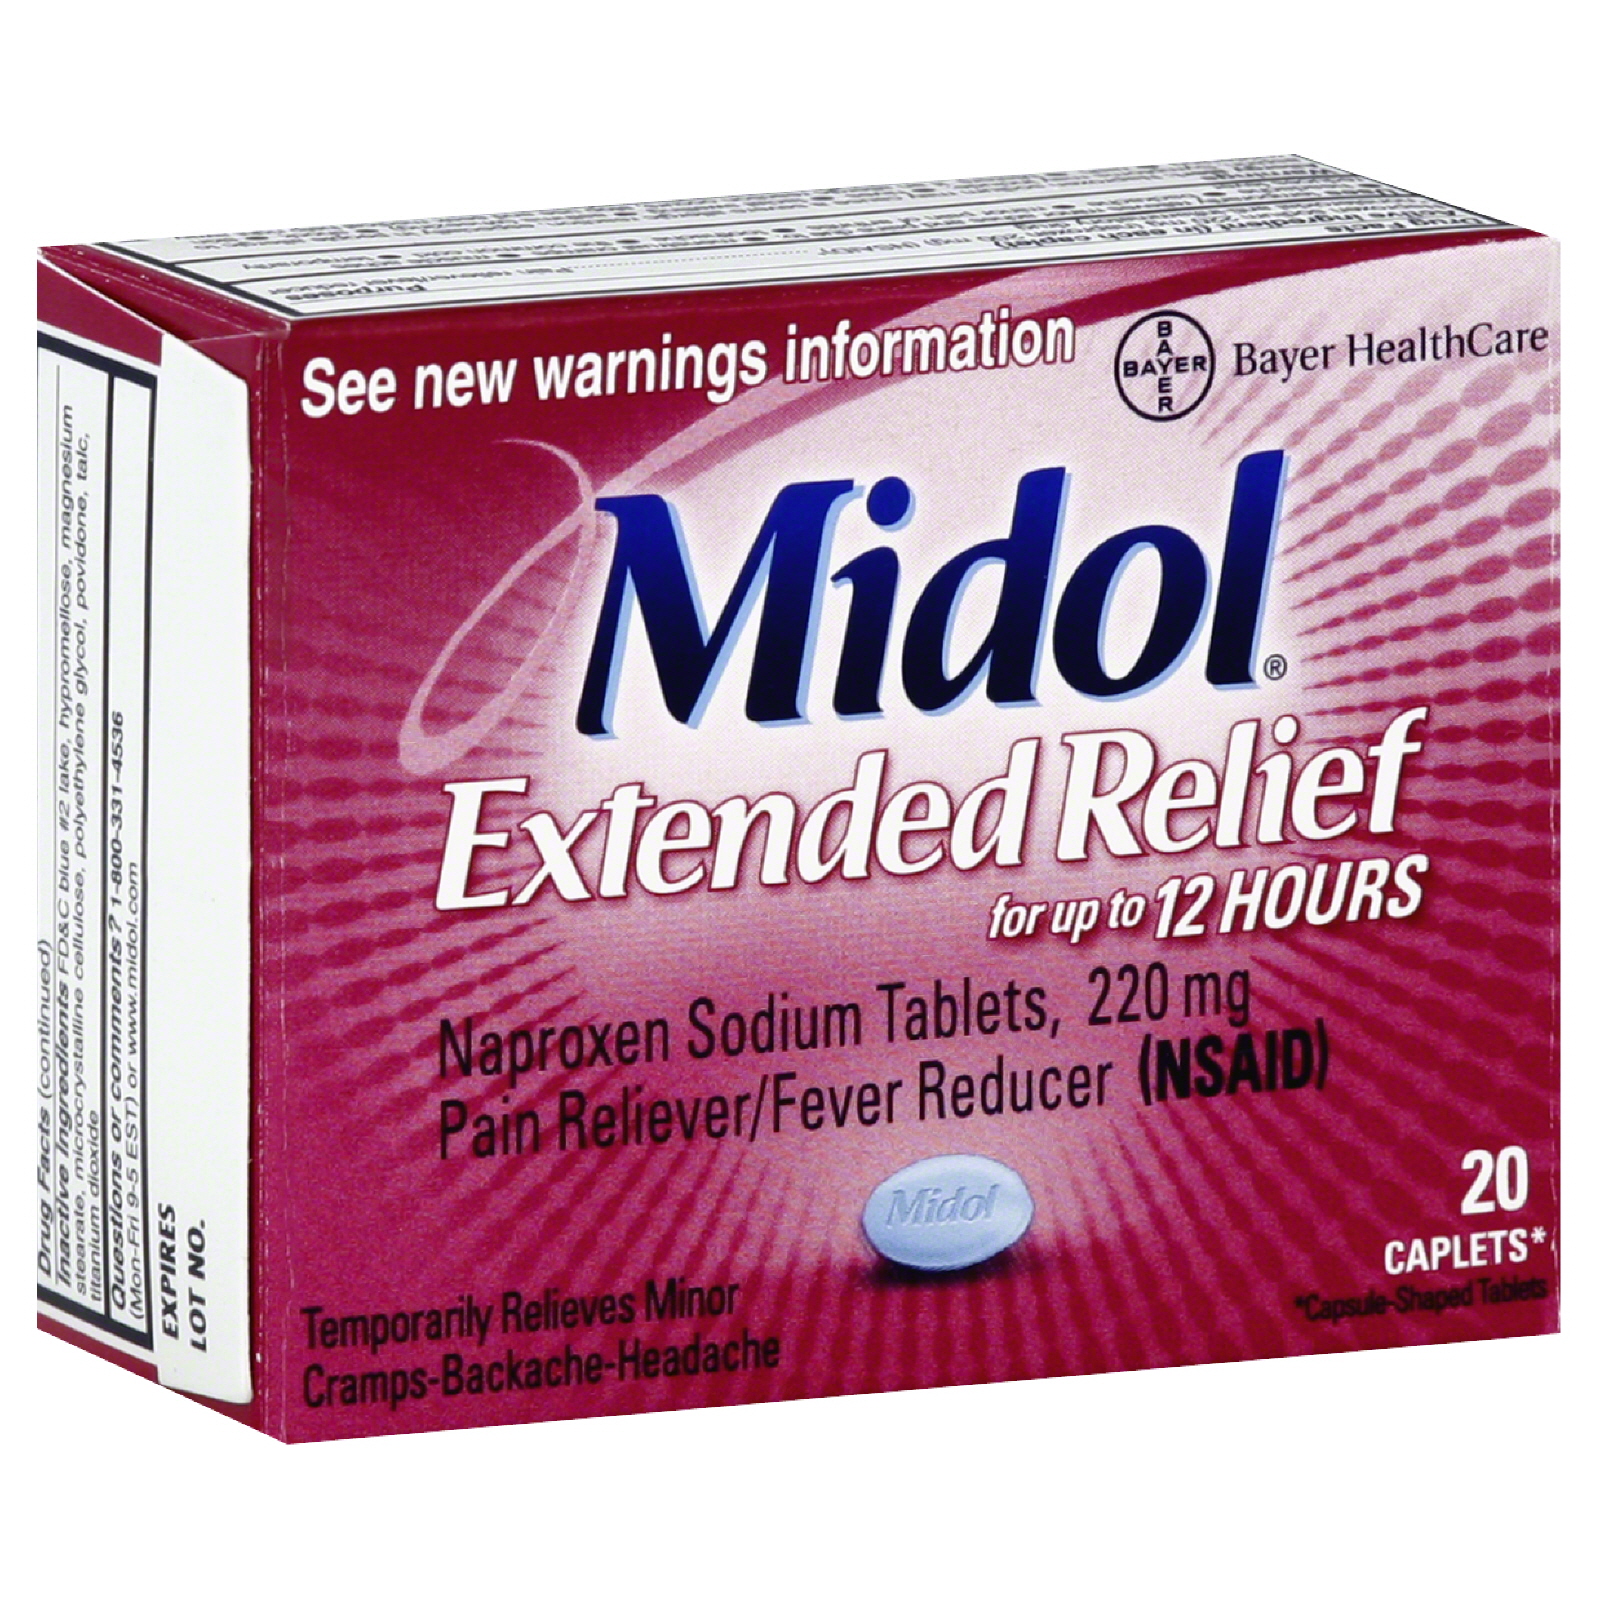 Midol Fever Reducer/Pain Reliever, Extended Relief, Caplets 20 caplets